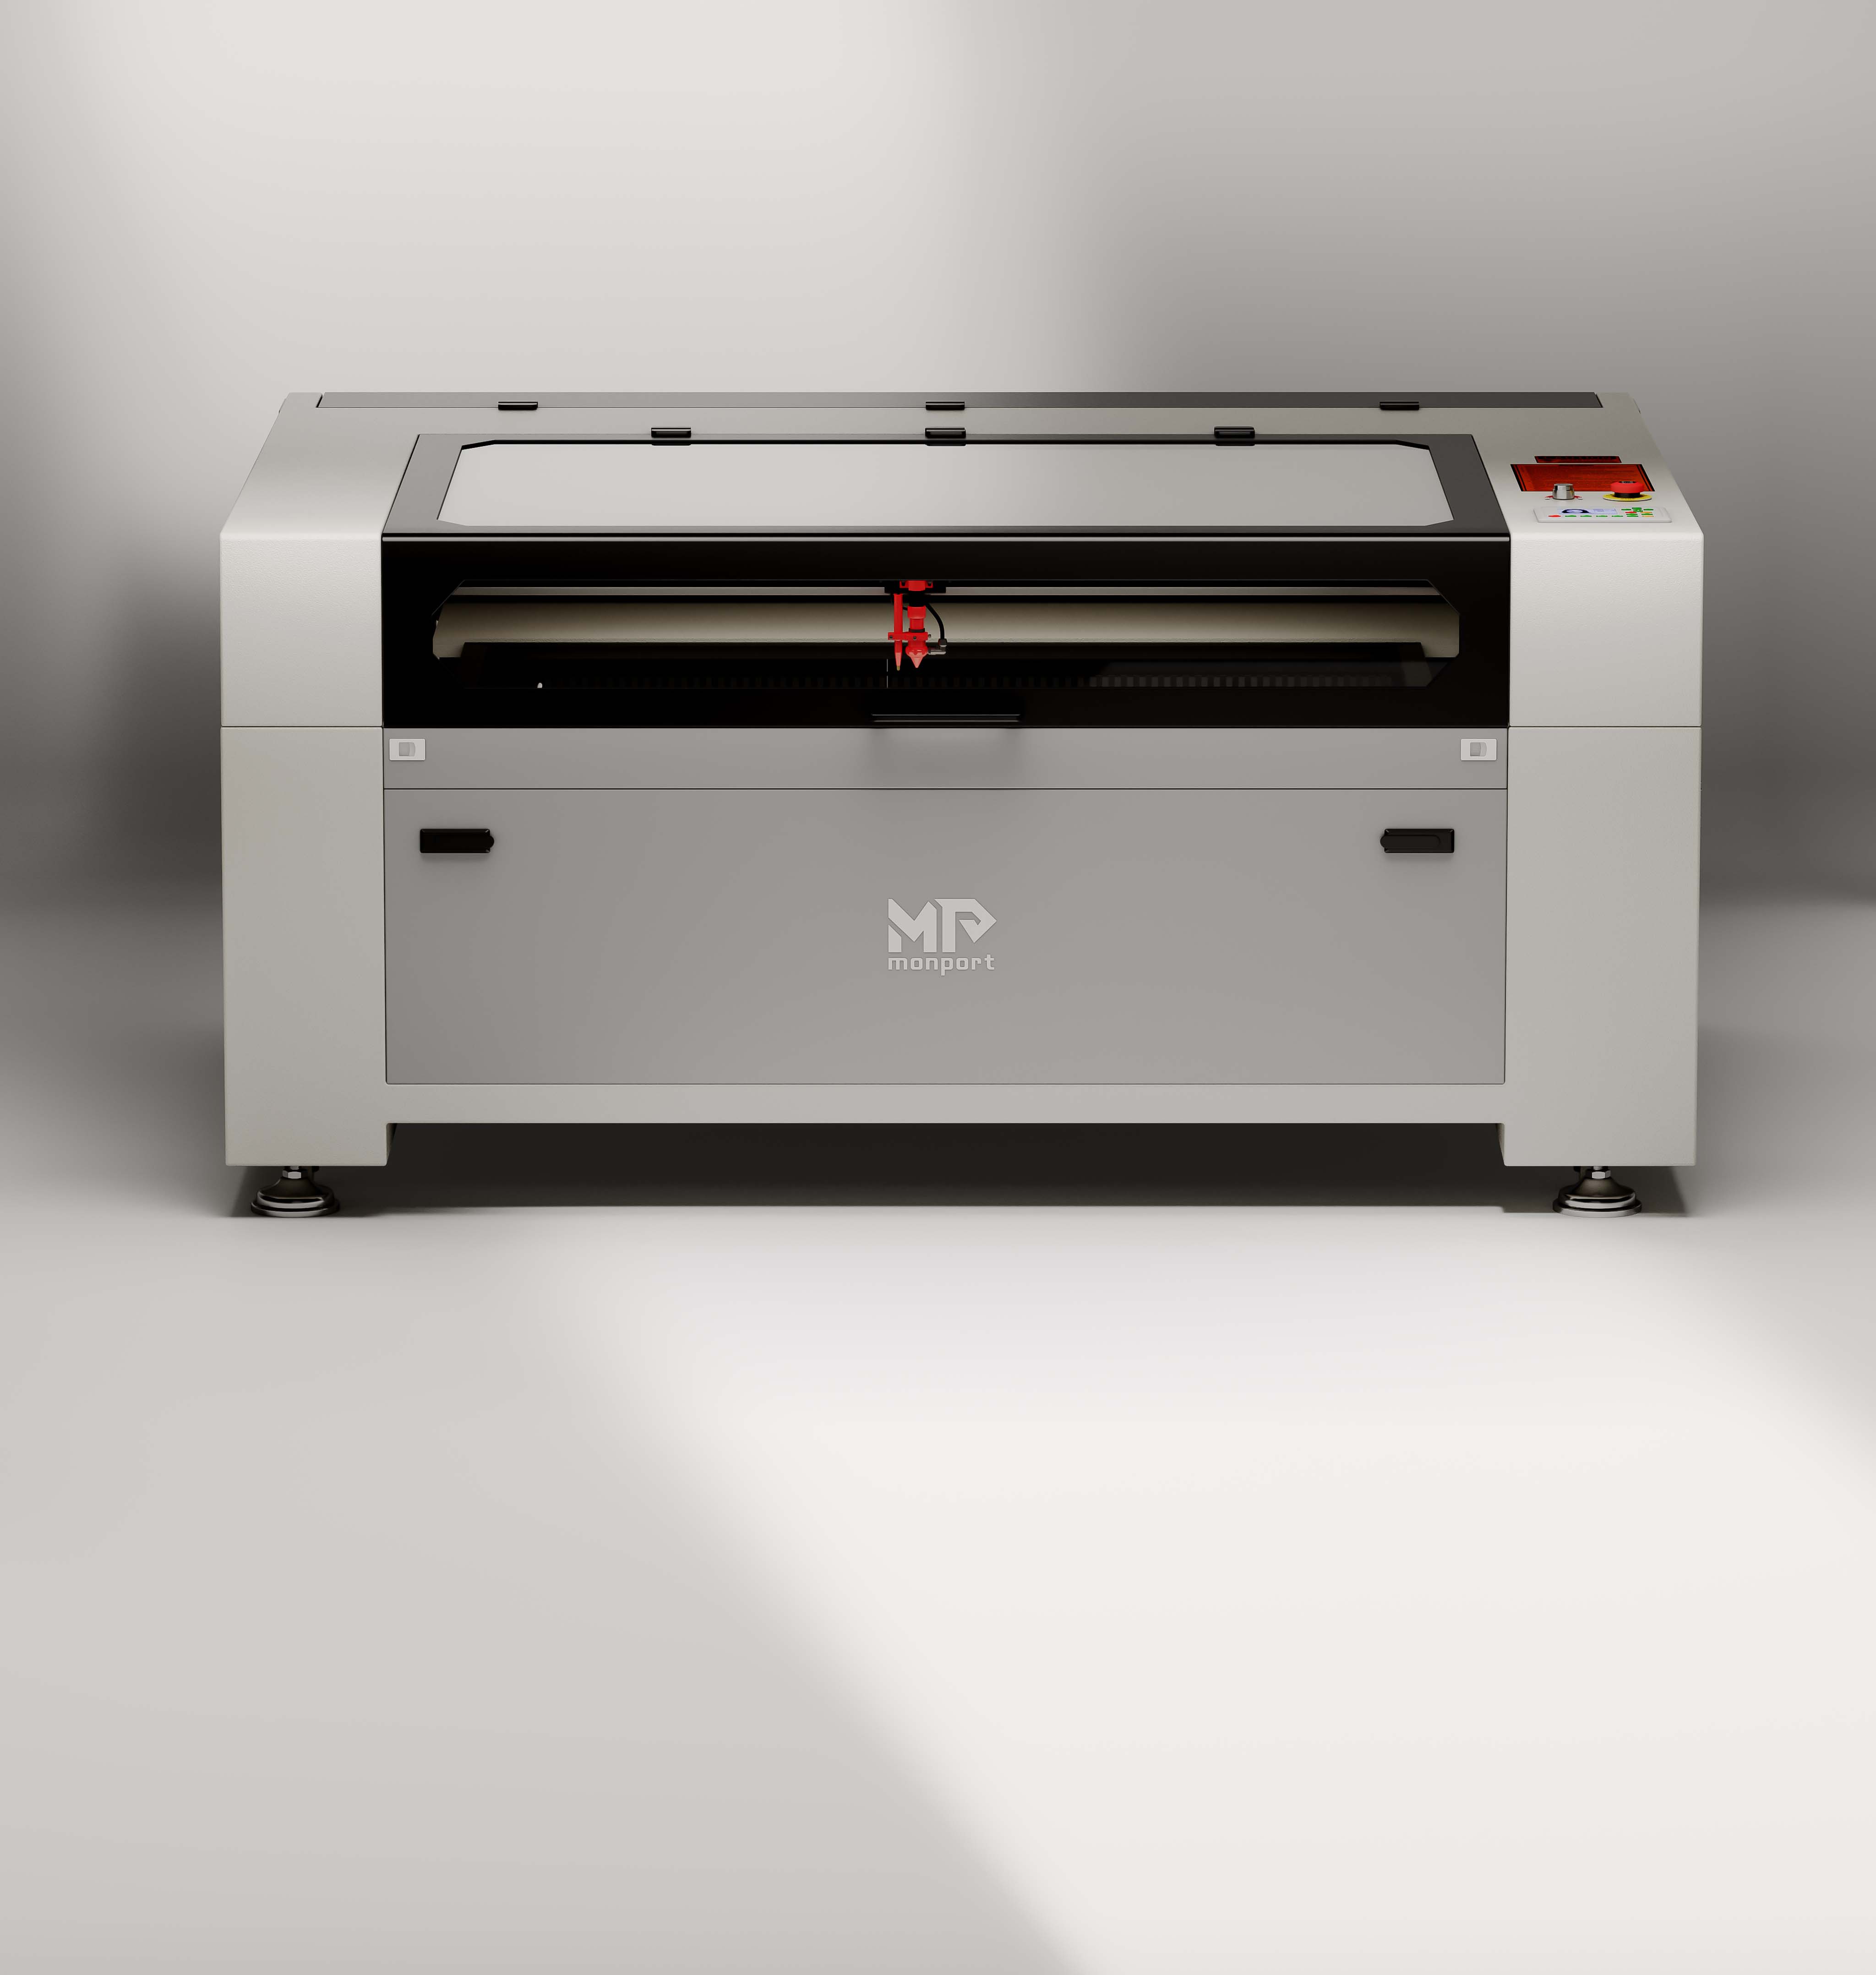 Entry Level CO2 Hobby Laser Cutter Machine for Beginners